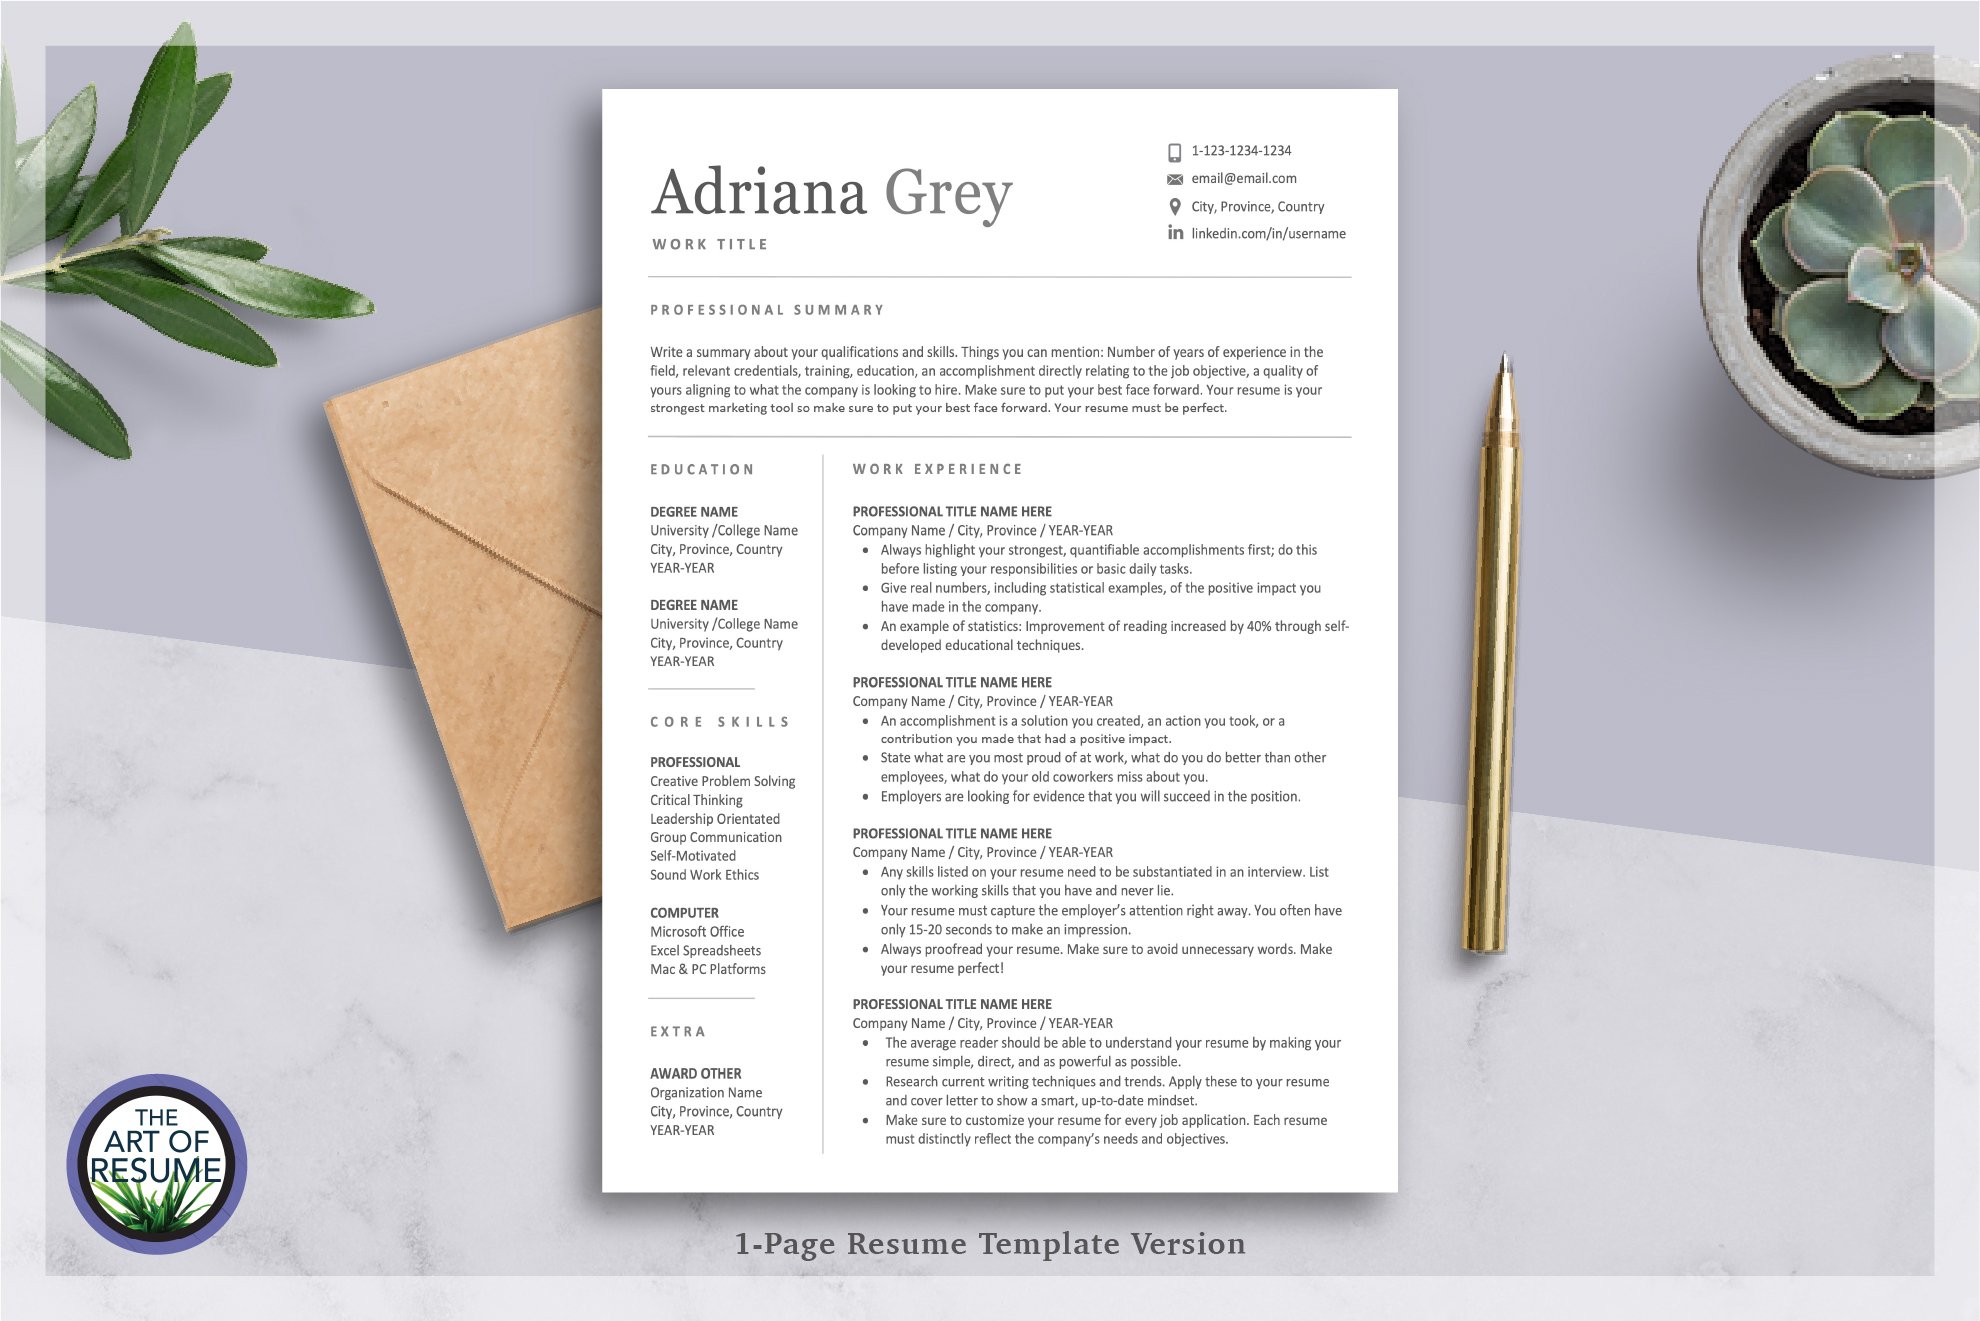 Clean Resume CV Template, Mac & PC cover image.